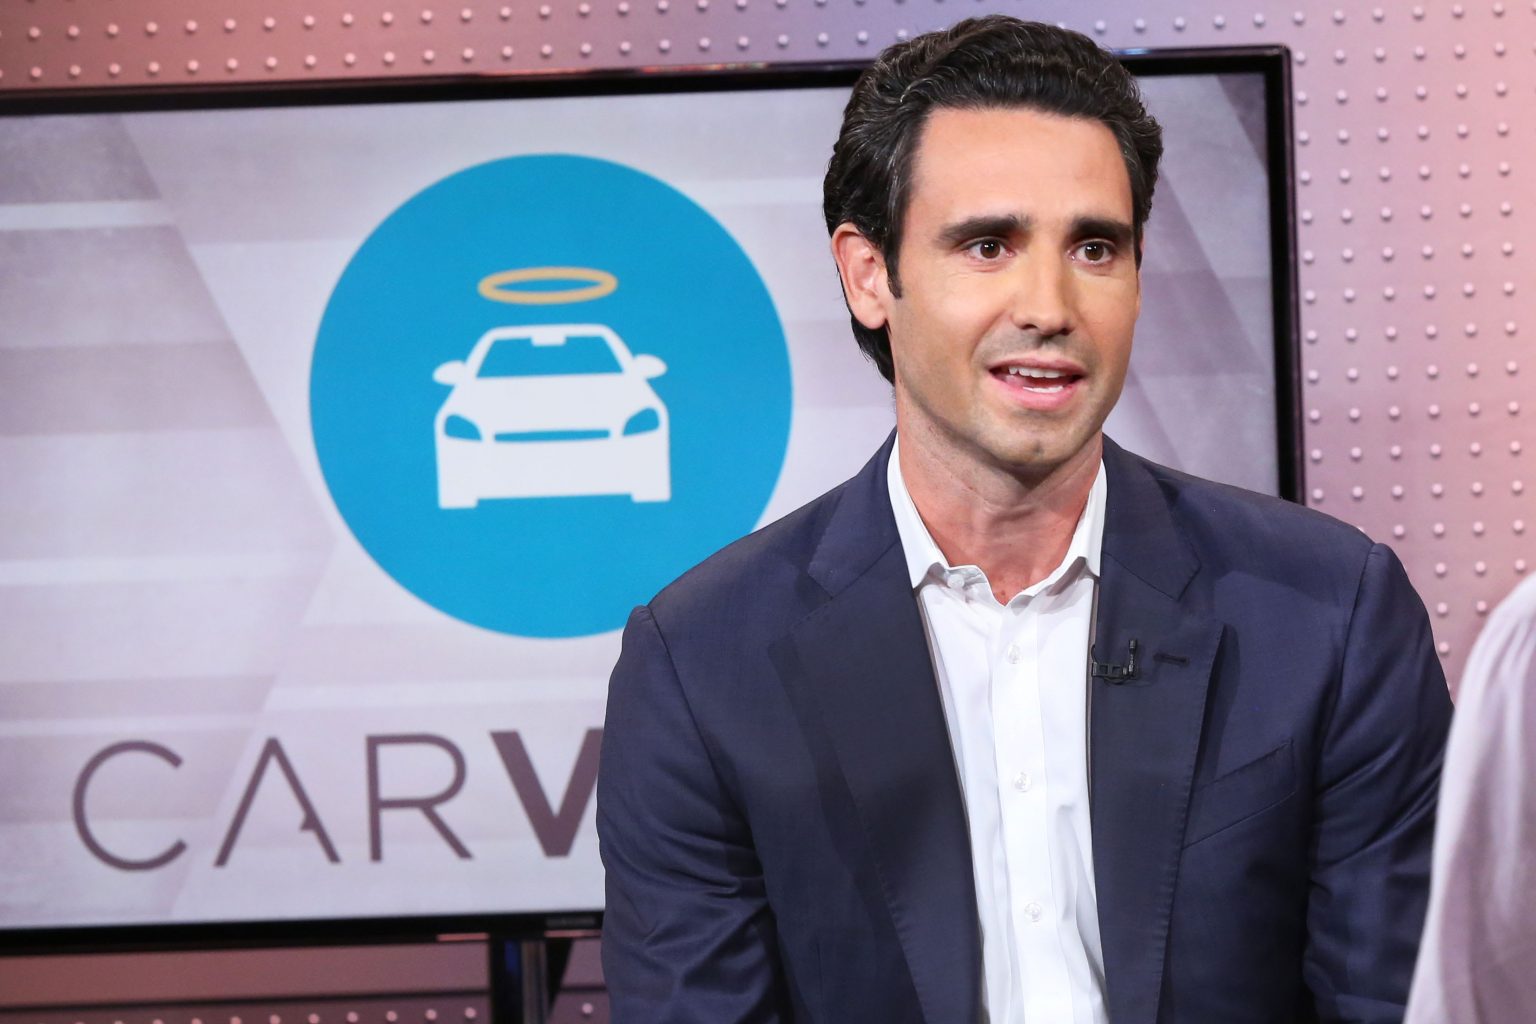 Carvana shares are up 24 after the company's first quarter sales